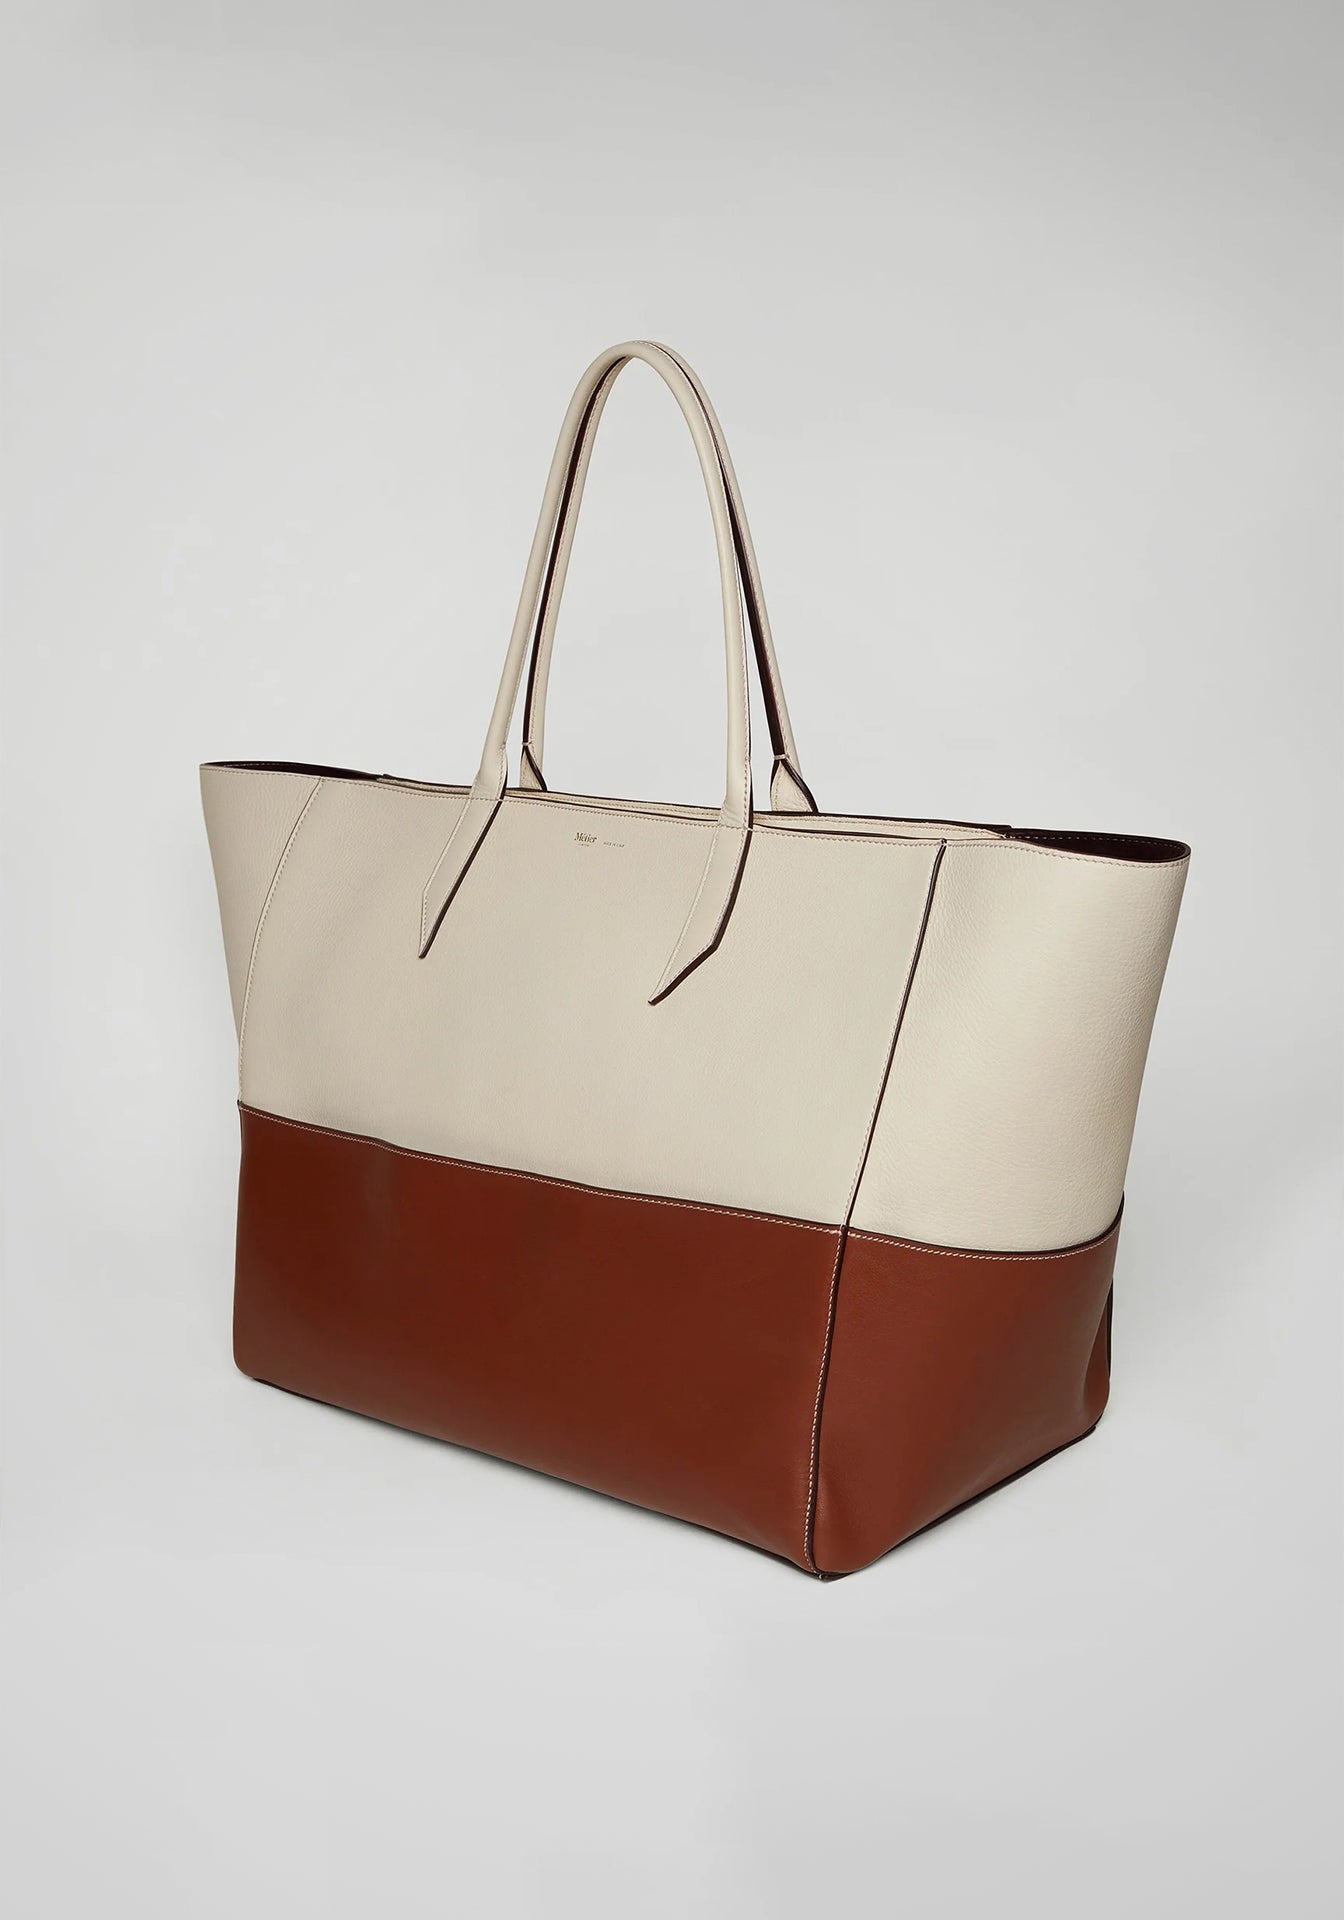 Métier Incognito Large Handmade Italian Calfskin Leather Travel Overnight Bag White and Cognac Brown